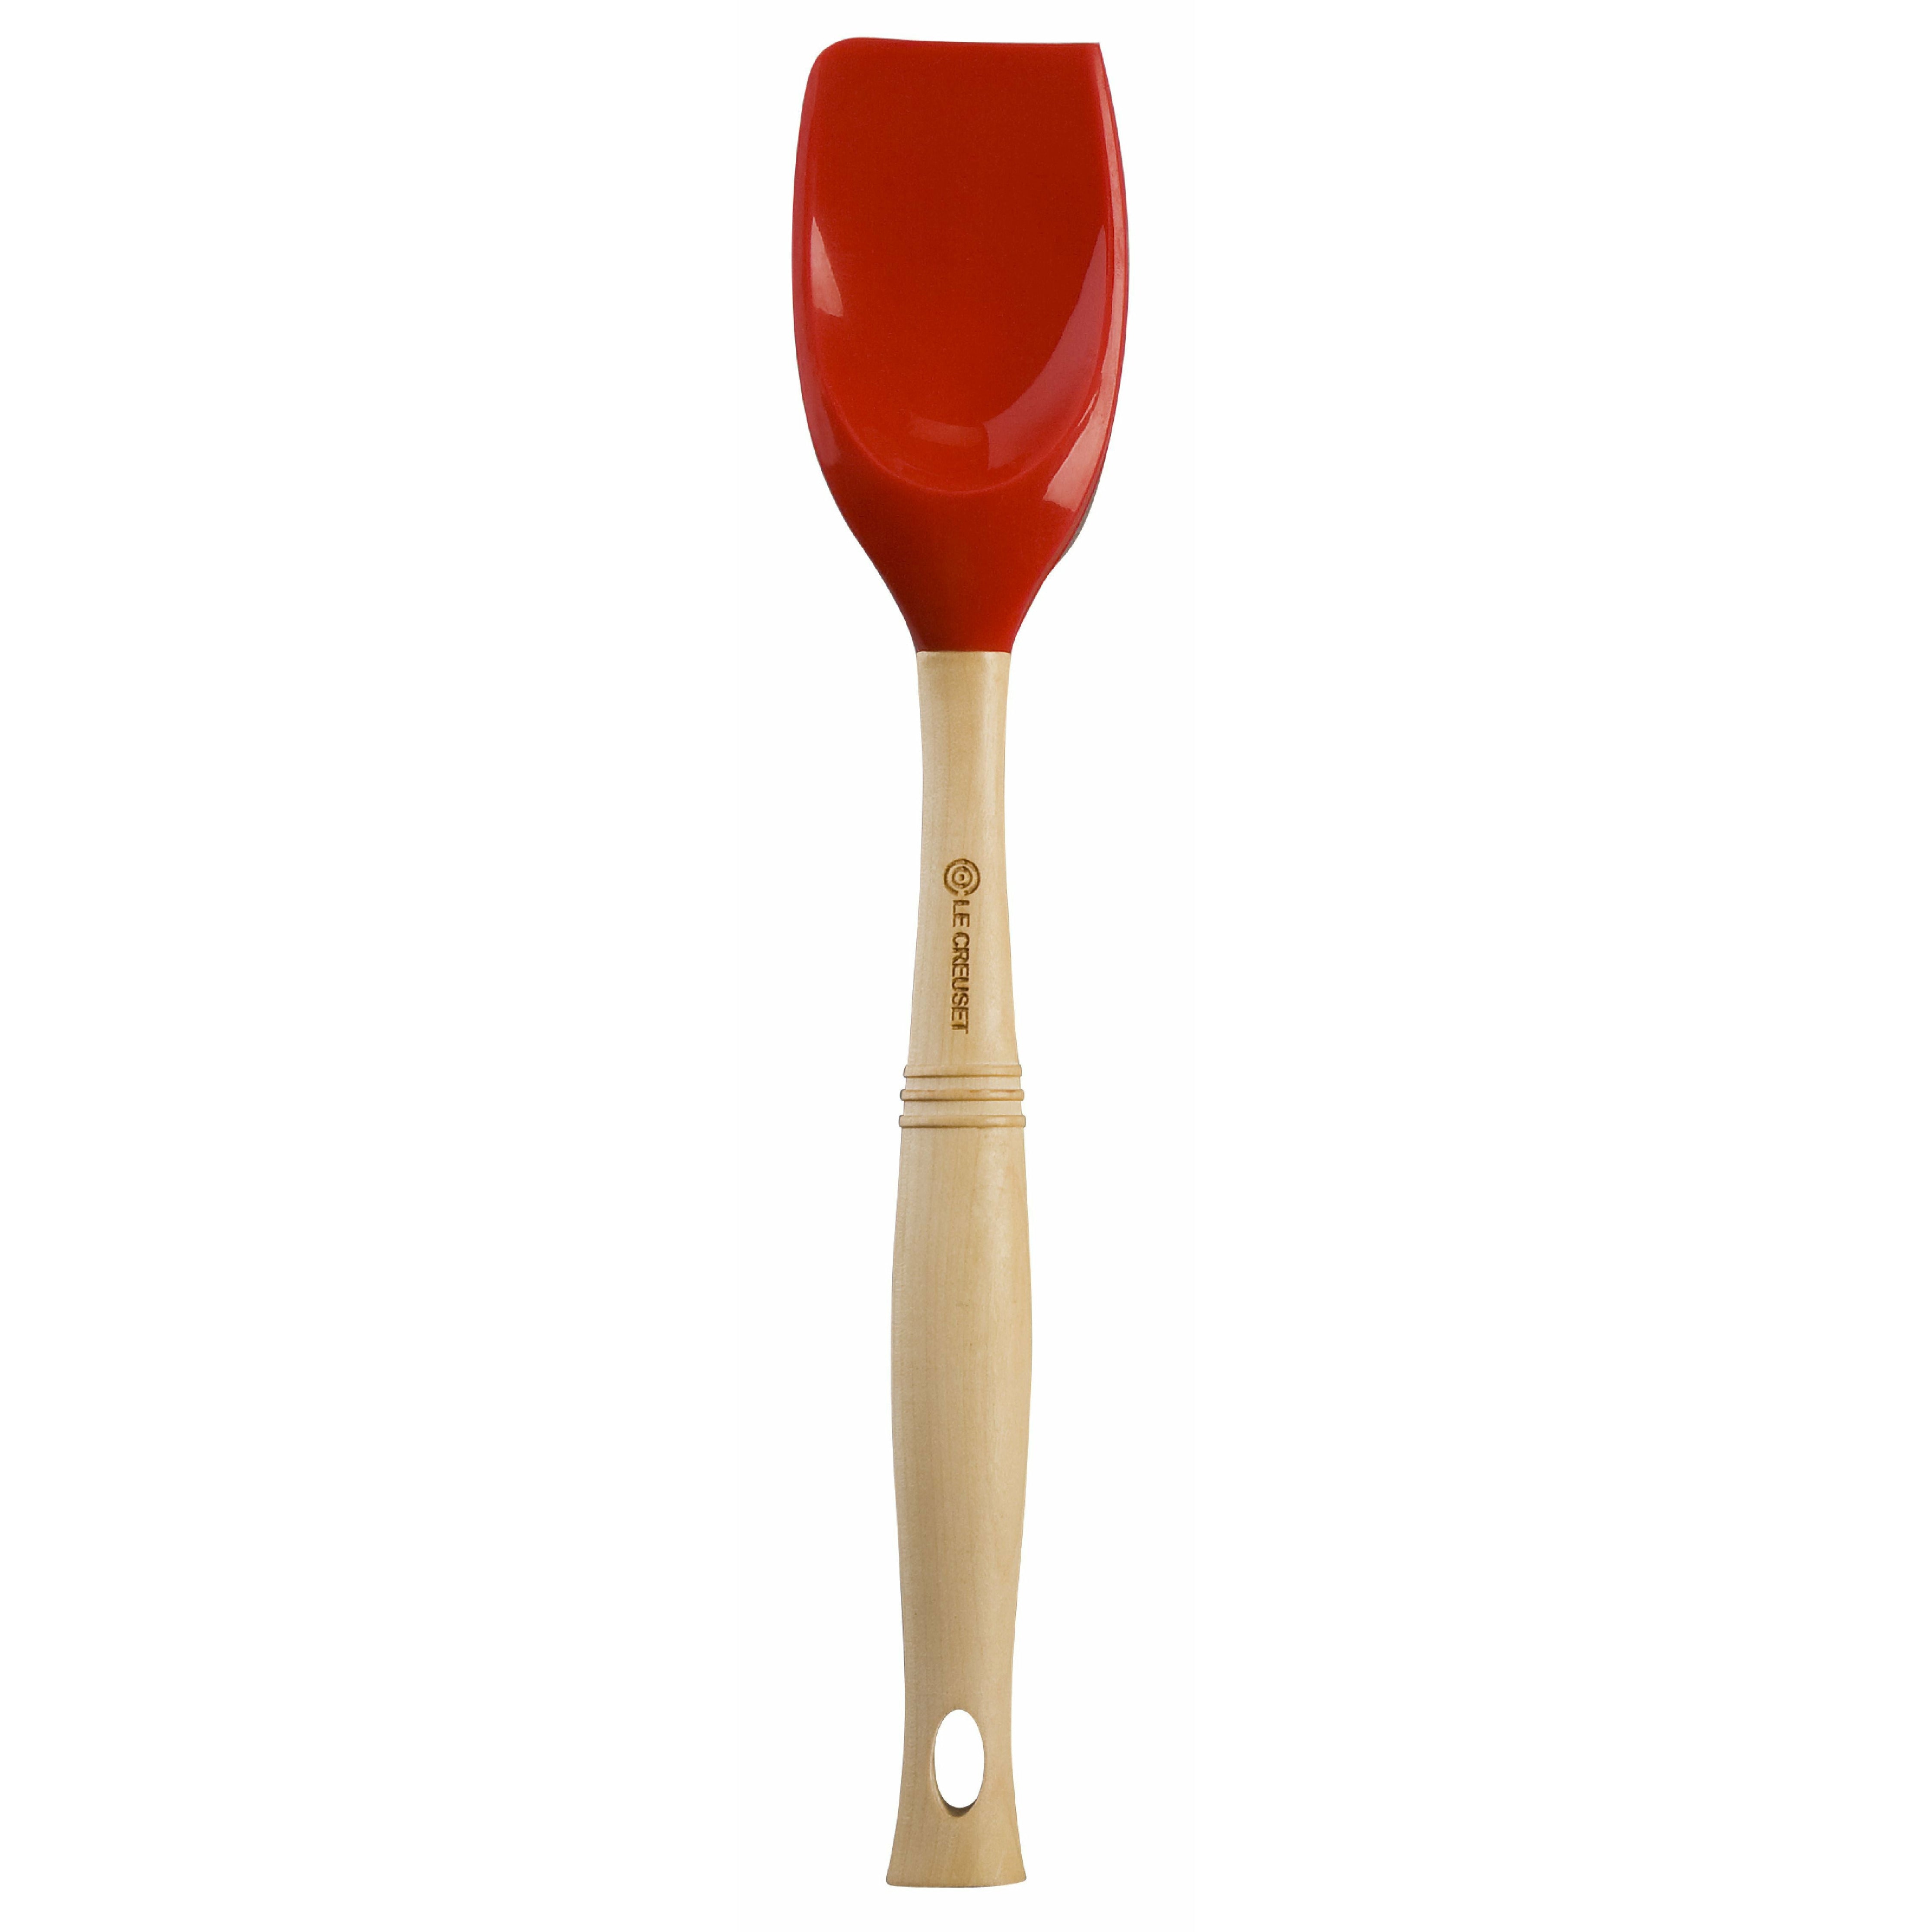 Le Creuset Cooking Spoon Premium, Cherry Red